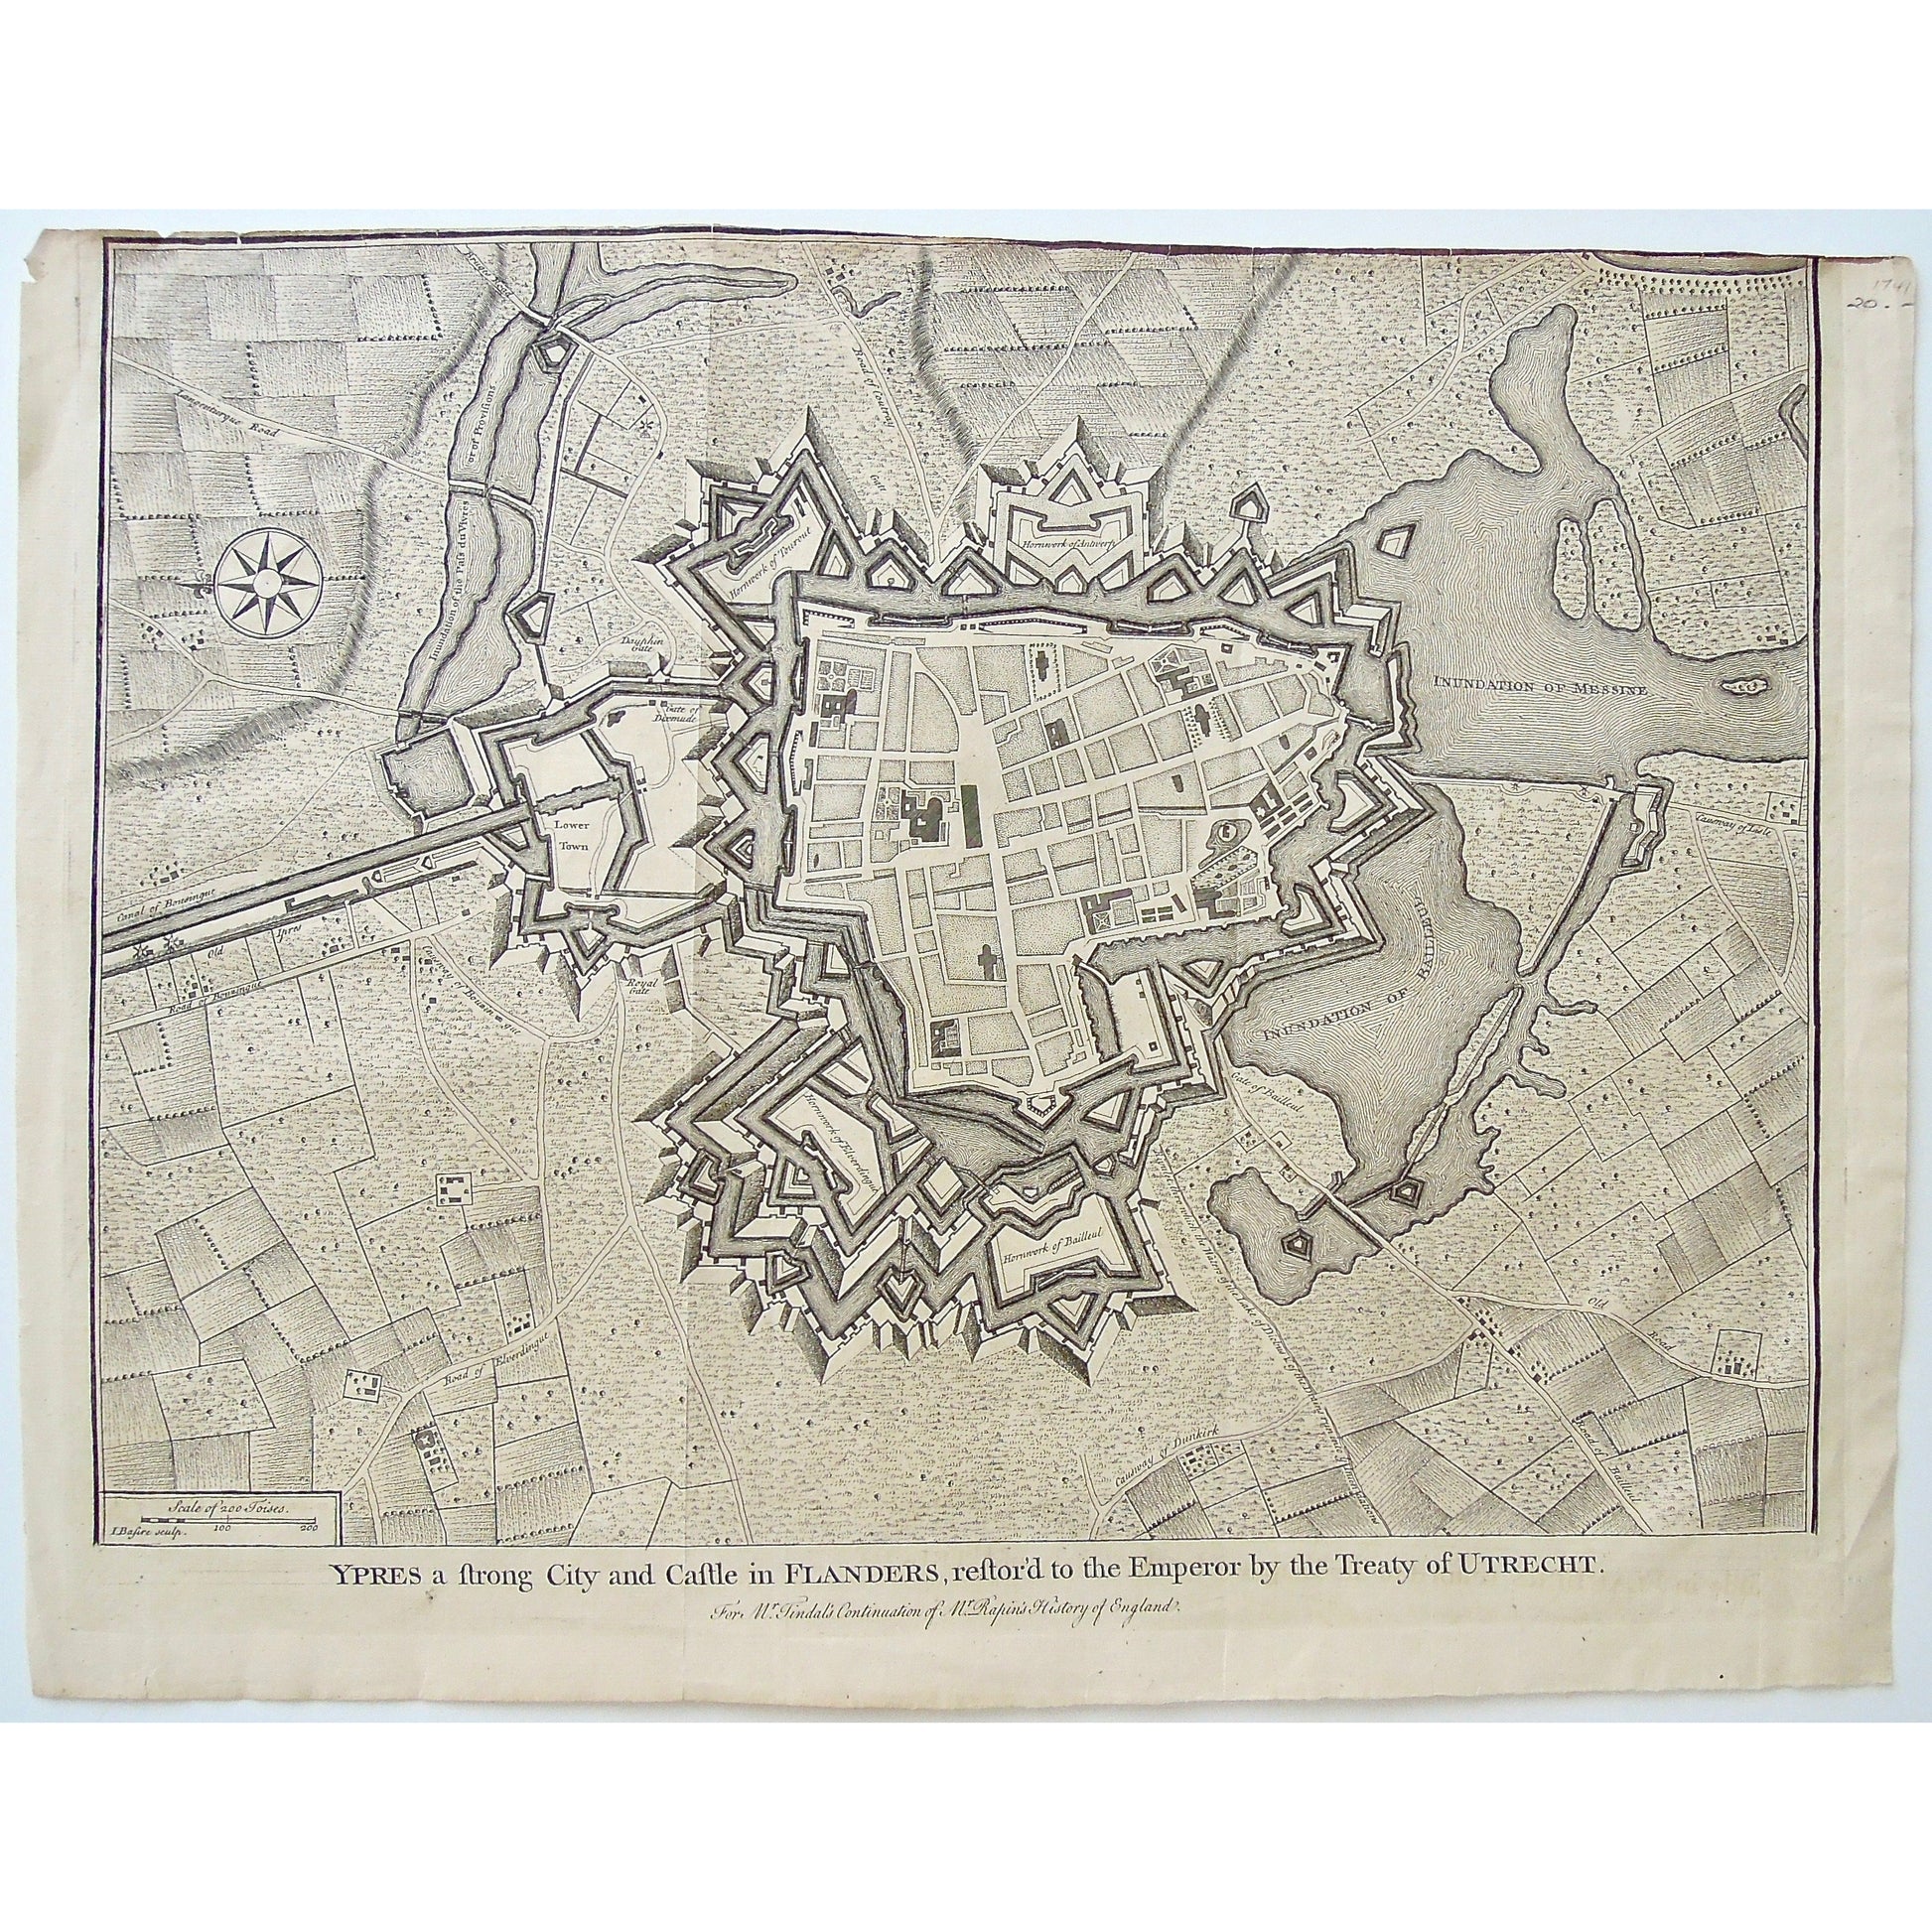 Belgium, Ypres, City of Ypres, Ypres City, Castle in Flanders, Flanders, Castle, restored to the Emperor, Treaty of Utrecht, Plan of the City, Plan, City Plan, Mr. Tindal's Continuation of Mr. Rapin's History of England, Mr. Tindal, Mr. Rapin, History of England, J. Basire, Basire, Dunkirk, Bailleul, Hornwork, Elverdingue, Hornwork of Elverdingue, Hornwork of Ballieul, Gate of Ballieul, Inundation od Pass de Vivres, Inundation of Provisions, Langenturque, Dauphin Gate, Gate of Dixmude, Map, Maps, Mappe, Art